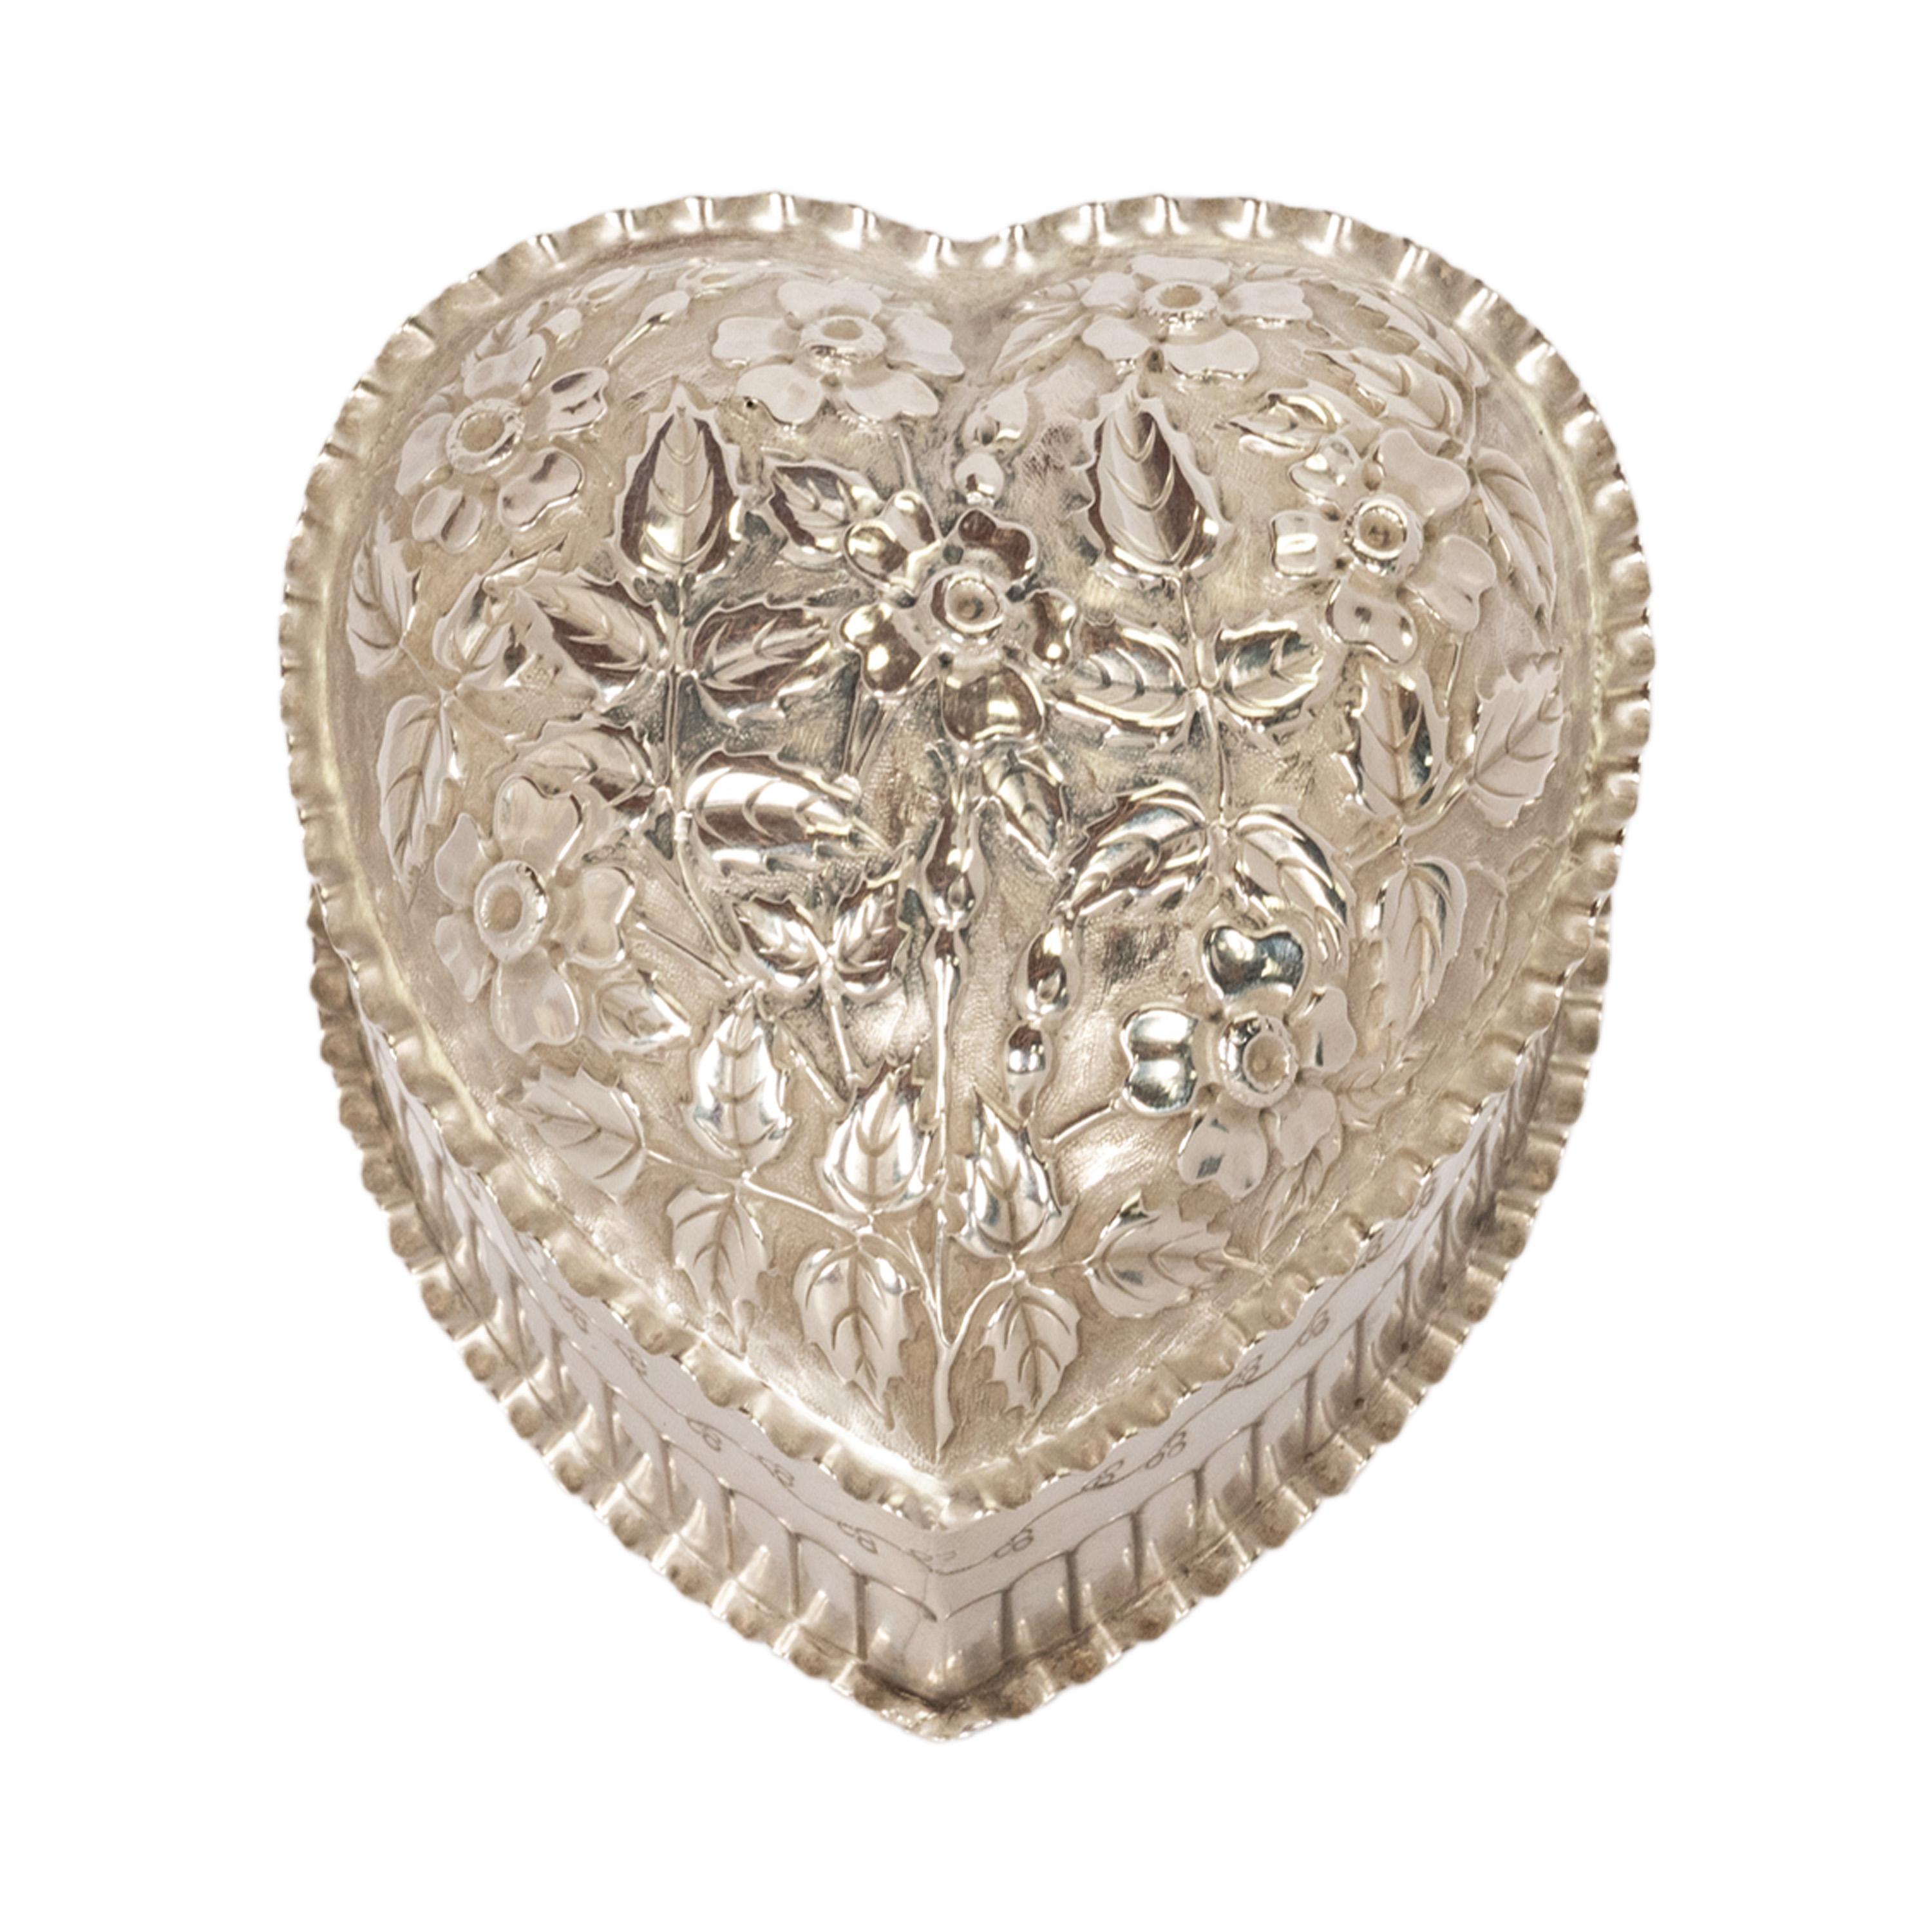 Antique Sterling Silver Repousse Heart Trinket Jewelry Box William Hutton London For Sale 8